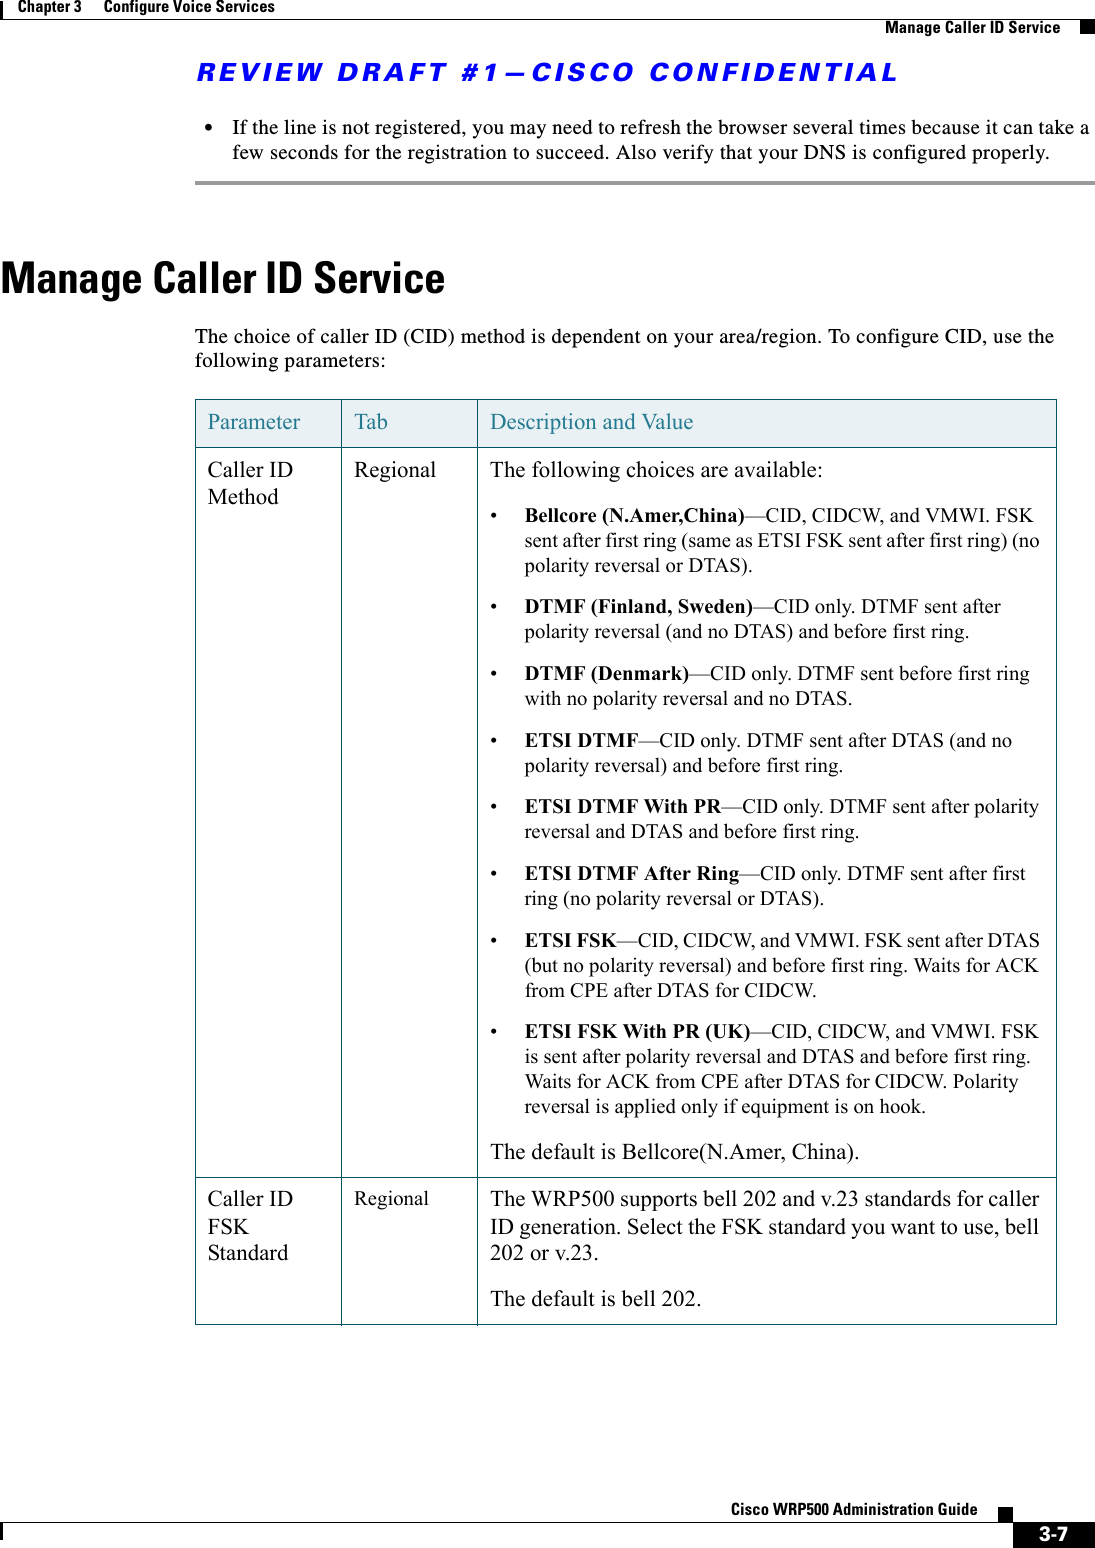 REVIEW DRAFT #1—CISCO CONFIDENTIAL3-7Cisco WRP500 Administration Guide Chapter 3      Configure Voice Services  Manage Caller ID Service•If the line is not registered, you may need to refresh the browser several times because it can take a few seconds for the registration to succeed. Also verify that your DNS is configured properly. Manage Caller ID ServiceThe choice of caller ID (CID) method is dependent on your area/region. To configure CID, use the following parameters:Parameter Tab Description and ValueCaller ID MethodRegional The following choices are available:•Bellcore (N.Amer,China)—CID, CIDCW, and VMWI. FSK sent after first ring (same as ETSI FSK sent after first ring) (no polarity reversal or DTAS).•DTMF (Finland, Sweden)—CID only. DTMF sent after polarity reversal (and no DTAS) and before first ring.•DTMF (Denmark)—CID only. DTMF sent before first ring with no polarity reversal and no DTAS.•ETSI DTMF—CID only. DTMF sent after DTAS (and no polarity reversal) and before first ring.•ETSI DTMF With PR—CID only. DTMF sent after polarity reversal and DTAS and before first ring.•ETSI DTMF After Ring—CID only. DTMF sent after first ring (no polarity reversal or DTAS). •ETSI FSK—CID, CIDCW, and VMWI. FSK sent after DTAS (but no polarity reversal) and before first ring. Waits for ACK from CPE after DTAS for CIDCW.•ETSI FSK With PR (UK)—CID, CIDCW, and VMWI. FSK is sent after polarity reversal and DTAS and before first ring. Waits for ACK from CPE after DTAS for CIDCW. Polarity reversal is applied only if equipment is on hook.The default is Bellcore(N.Amer, China).Caller ID FSK StandardRegional The WRP500 supports bell 202 and v.23 standards for caller ID generation. Select the FSK standard you want to use, bell 202 or v.23.The default is bell 202.